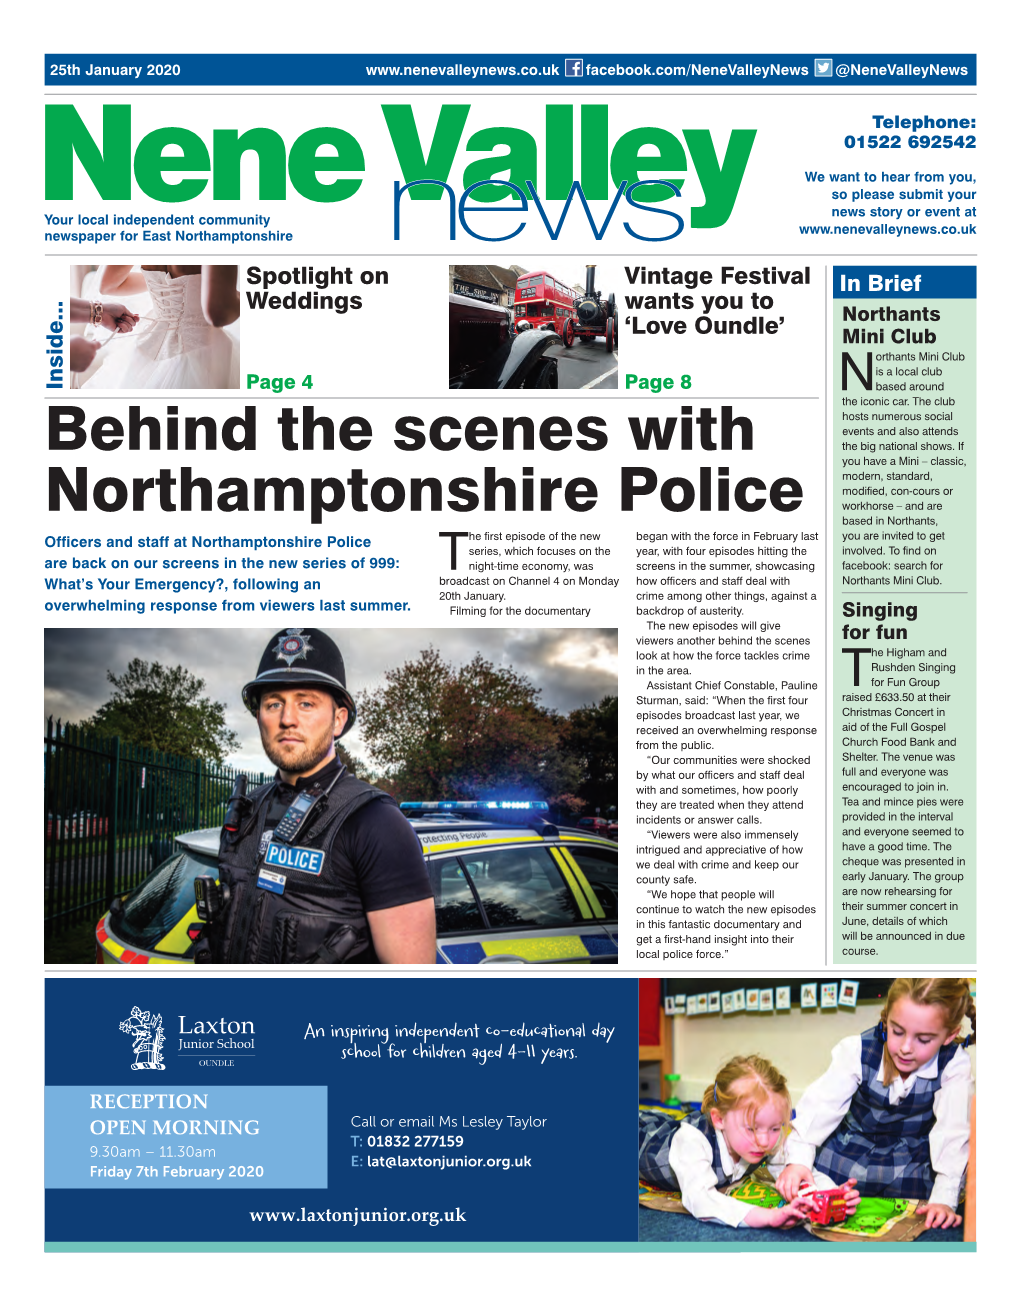 Behind the Scenes with Northamptonshire Police